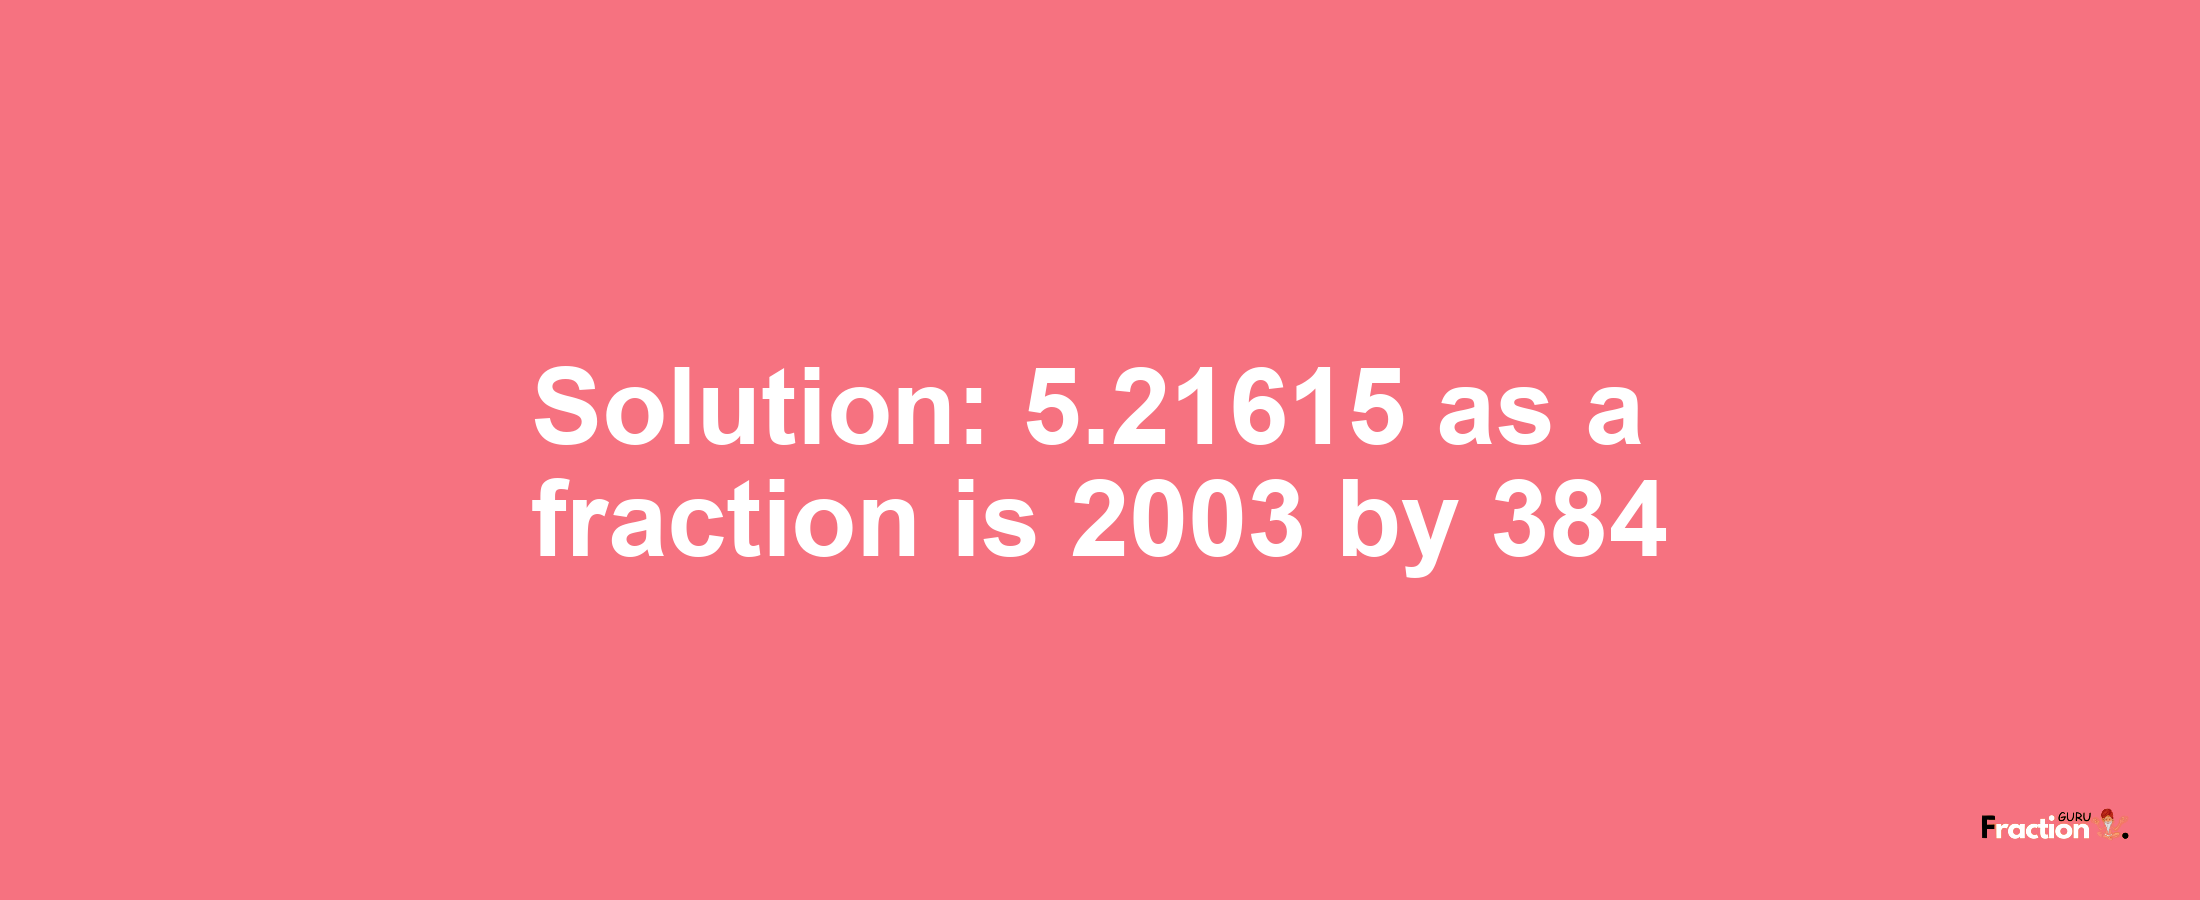 Solution:5.21615 as a fraction is 2003/384